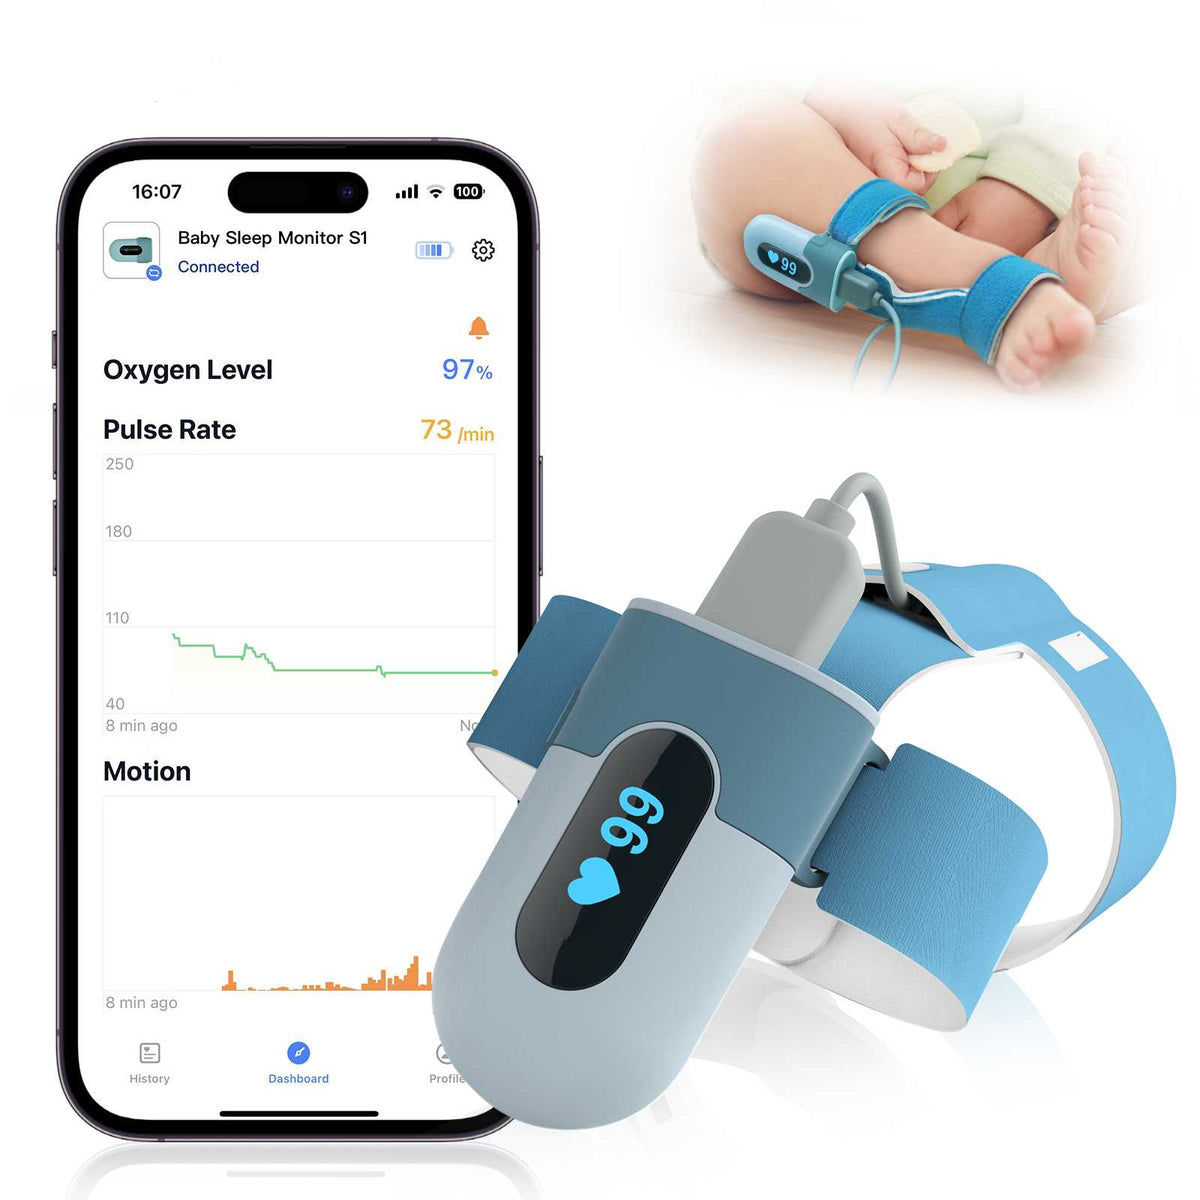 Baby Sleep Monitor Tracks Infant's Heart Rate, Average O2 Level & Movement, With APP Notifications, Fits Babies 0-36 Months Wellue